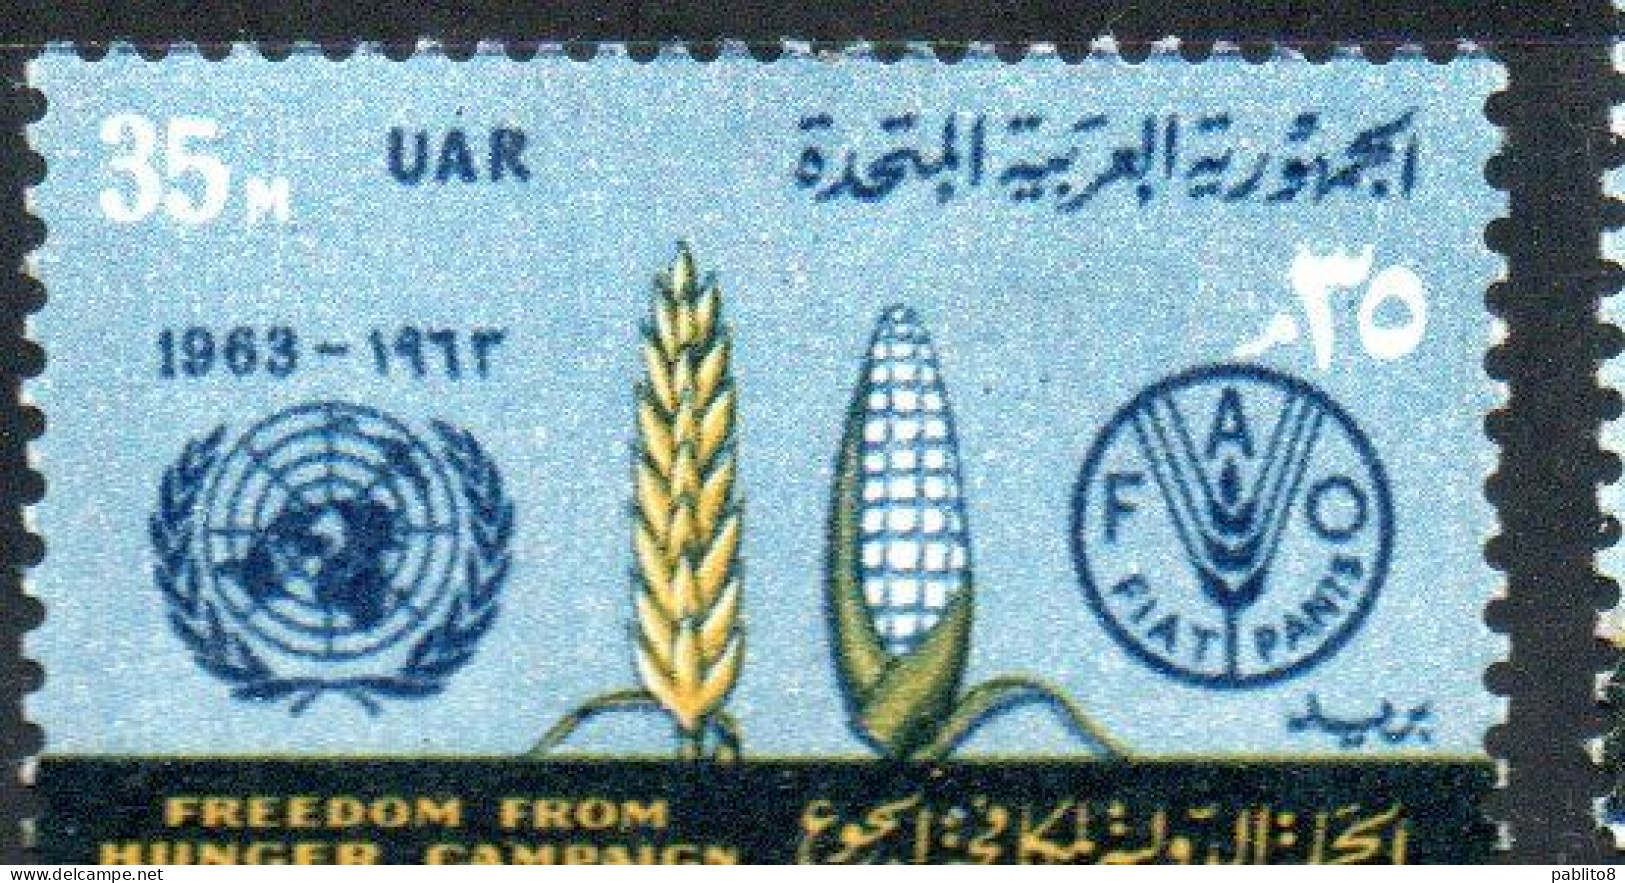 UAR EGYPT EGITTO 1963 FAO FREEDOM FROM HUNGER CAMPAIGN WHEAT CORN AND EMBLEMS 35m MH - Ungebraucht